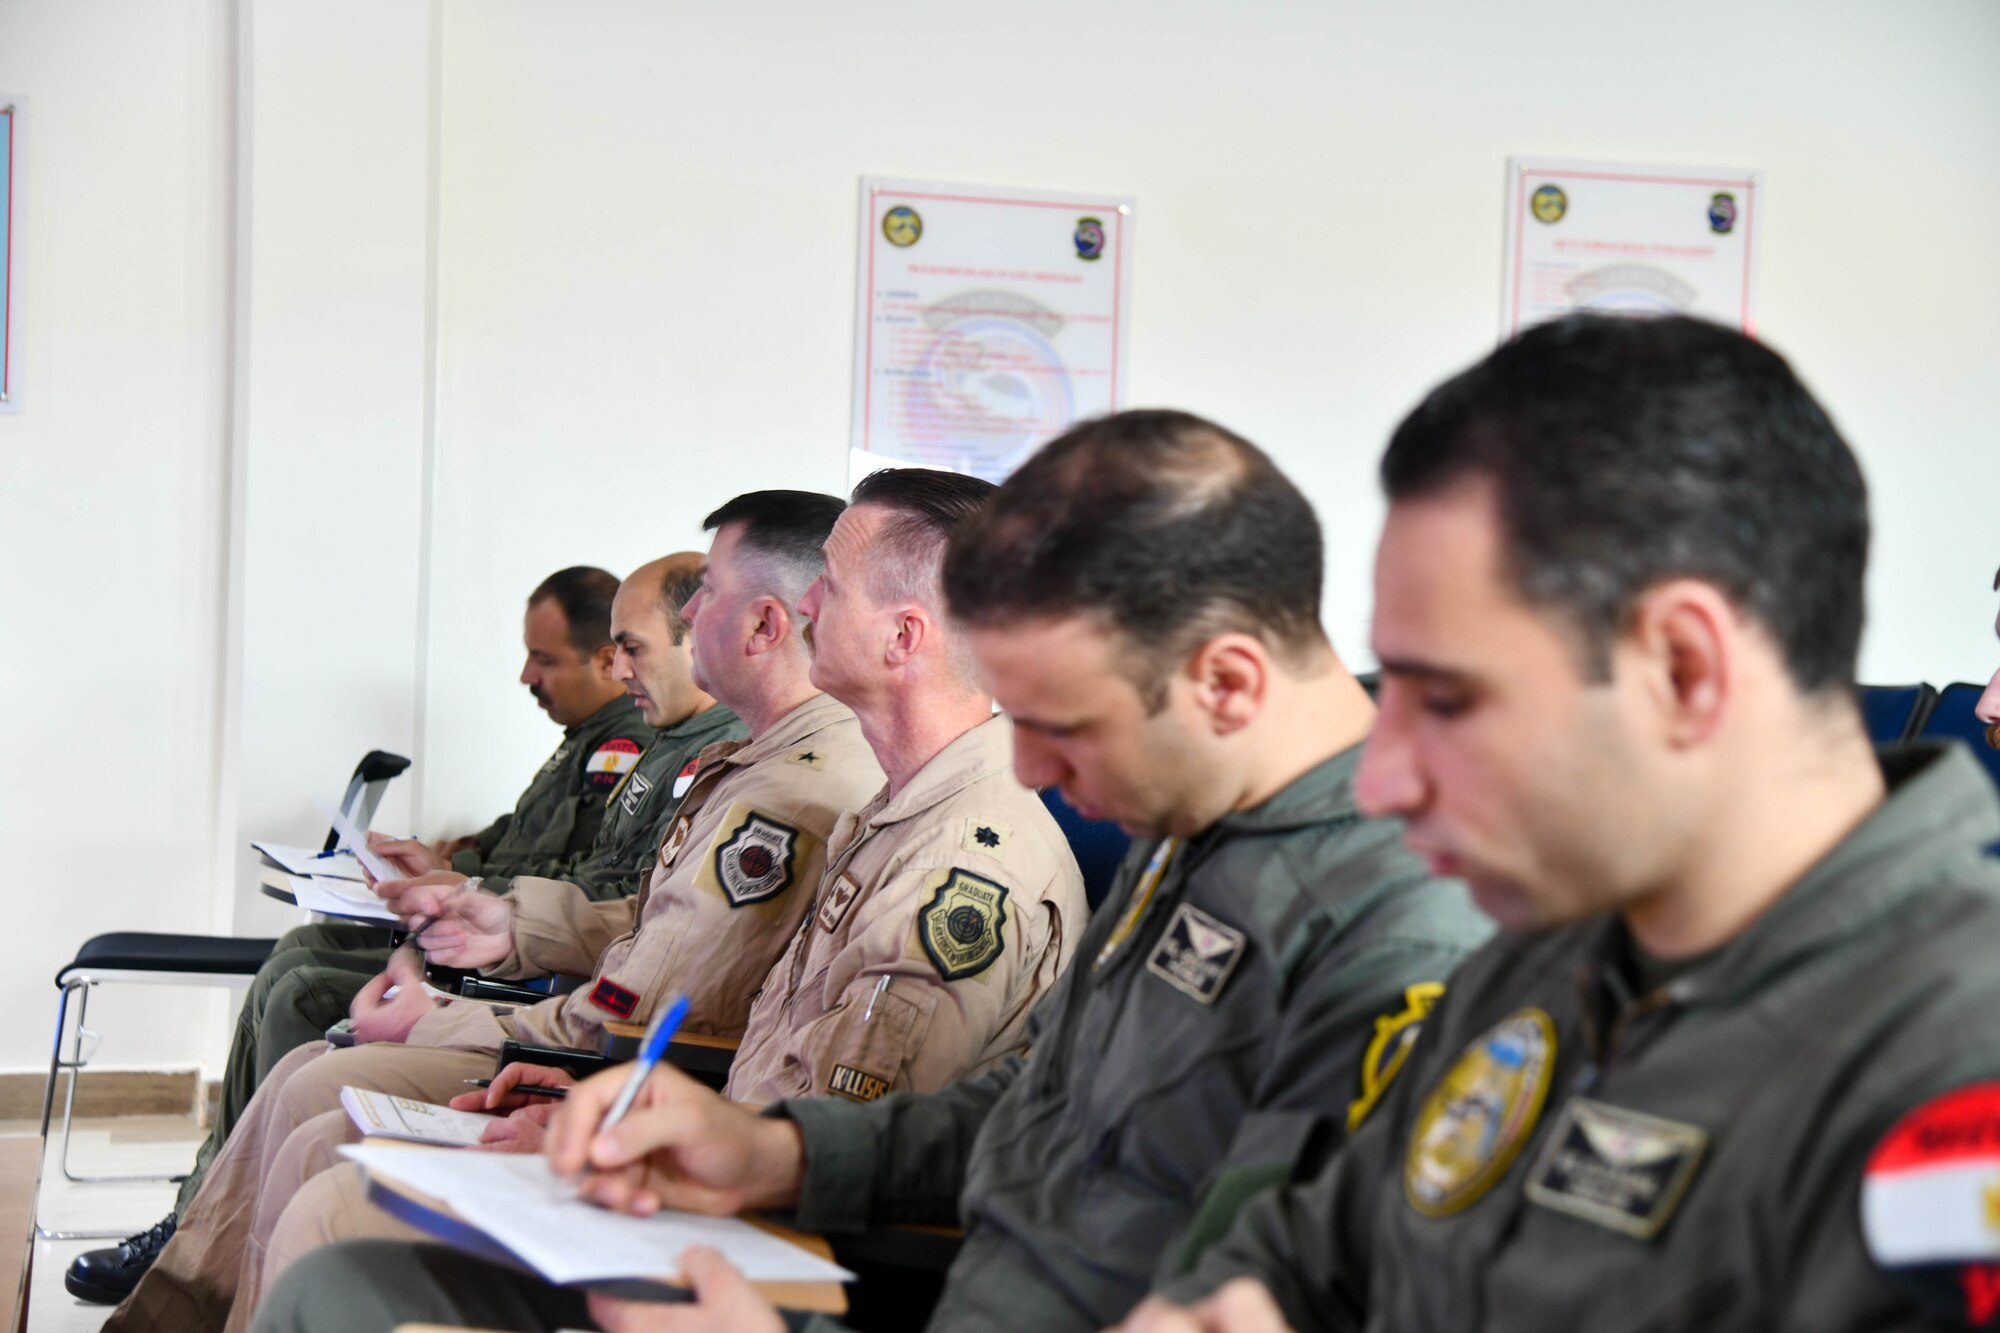 Ninth Air Force (AFCENT) and Egyptian Air Force members conduct a mission planning session during exercise Agile Phoenix, which took place June 26-July 3, 2022 to help strengthen interoperability and relations between both nations. More than 140 U.S. service members participated in this training event focused on increasing Agile Combat Readiness, as well as offensive and defensive counter air capability